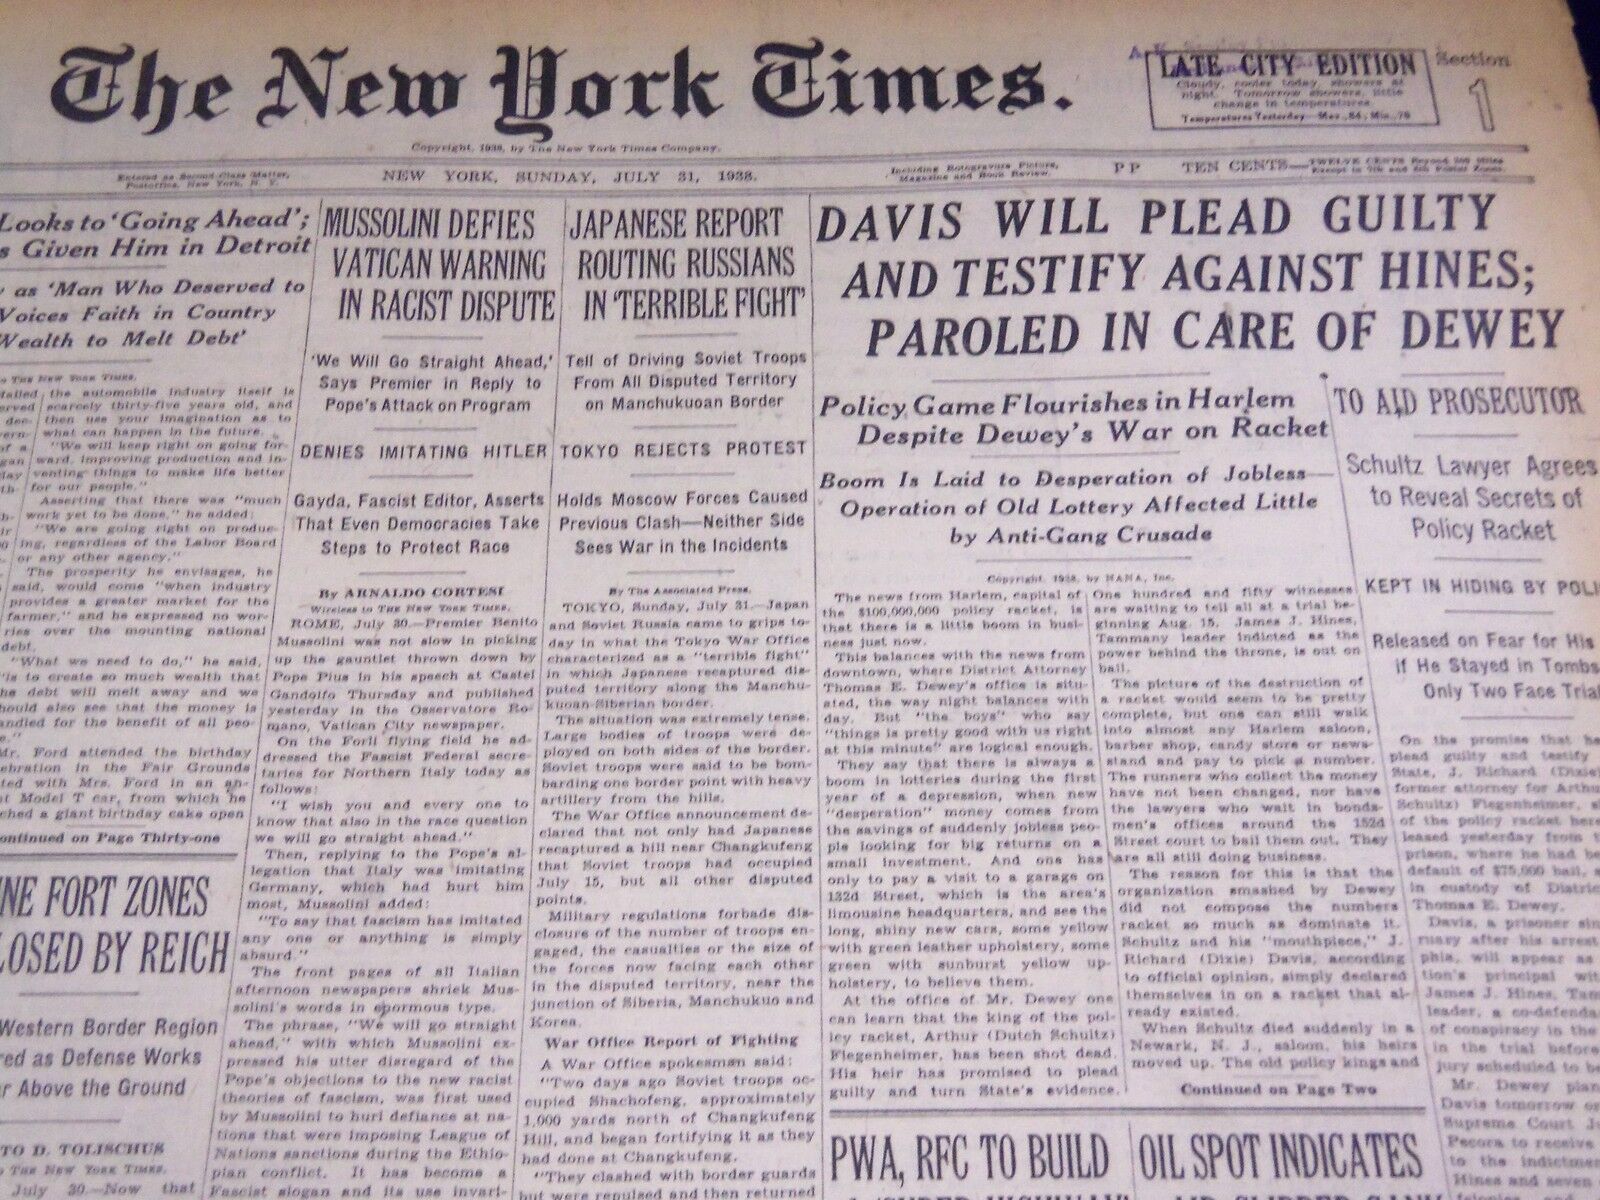 1938 JULY 31 NEW YORK TIMES - DAVIS WILL PLEAD GUILTY & TESTIFY AGAINST- NT 2392